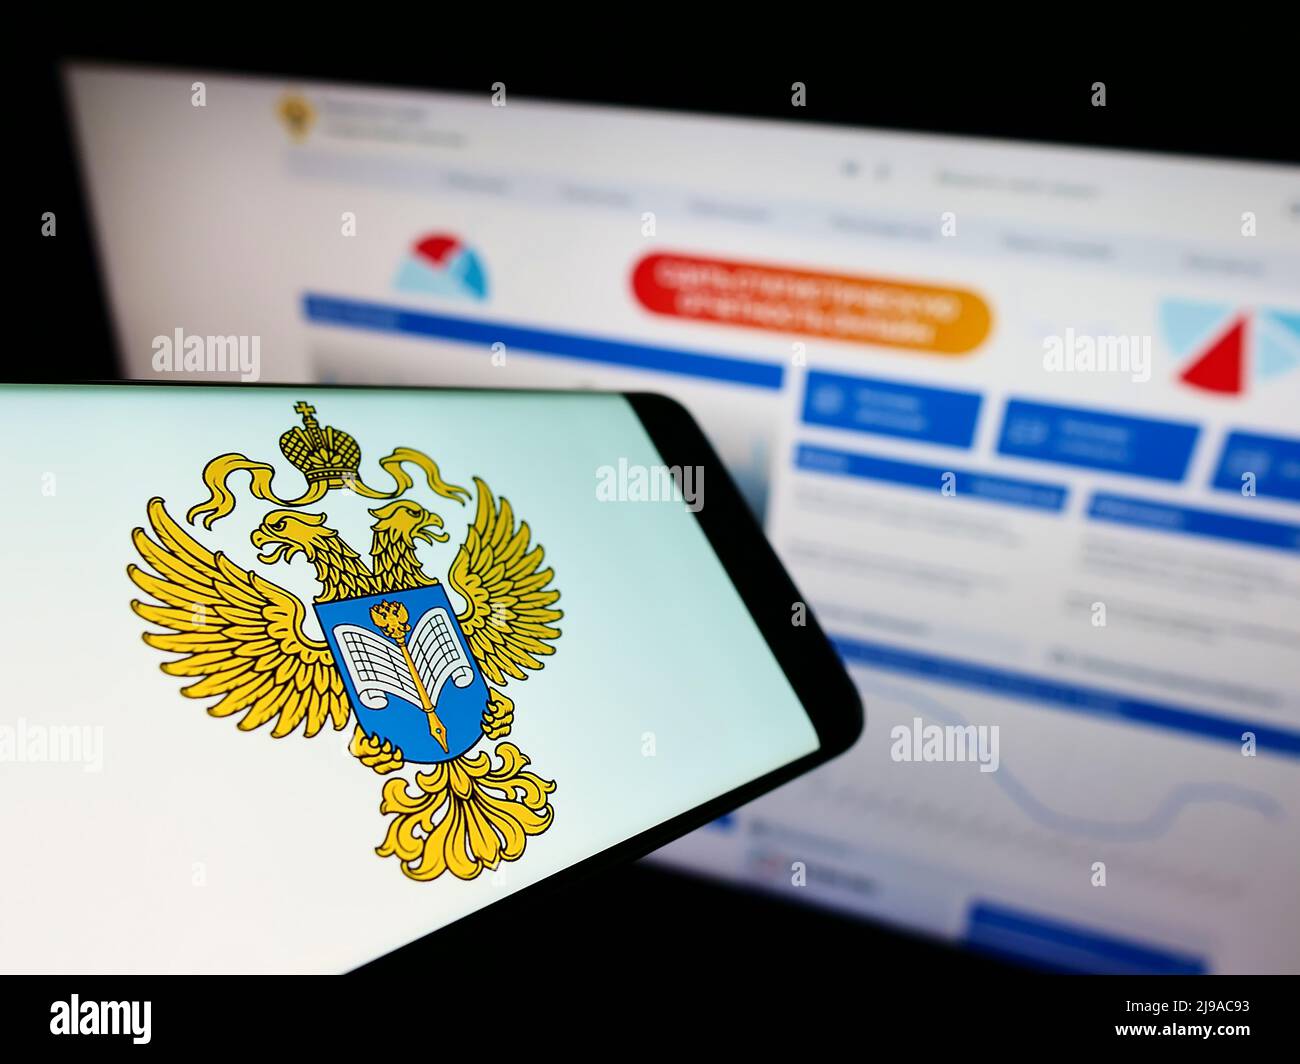 Mobile phone with logo of Russian Federal State Statistics Service (Rosstat) on screen in front of website. Focus on center of phone display. Stock Photo